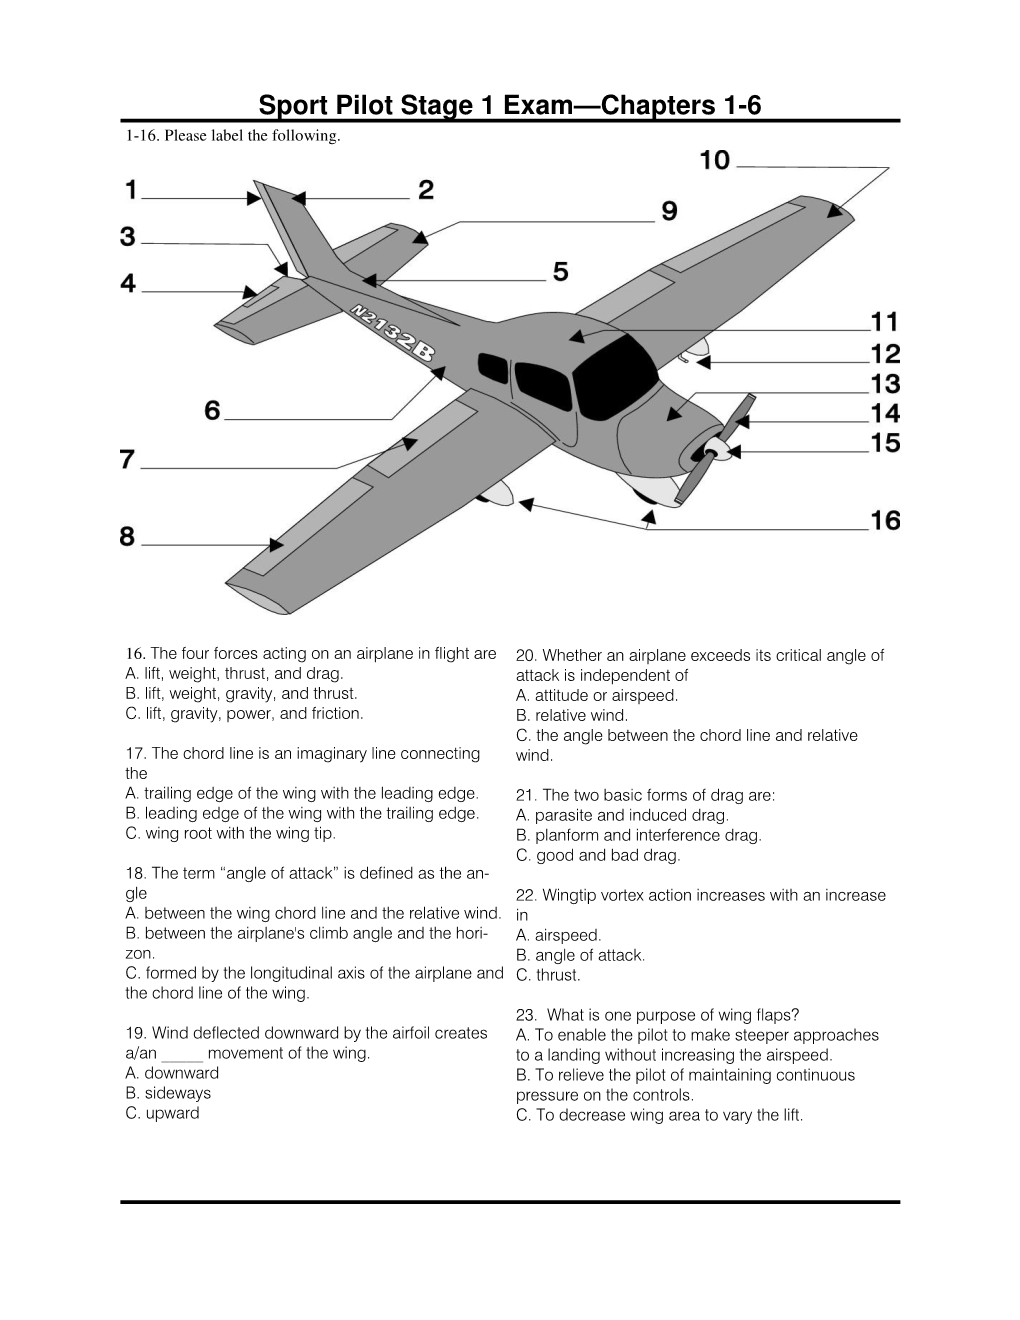 Sport Pilot Stage 1 Exam—Chapters 1-6 1-16